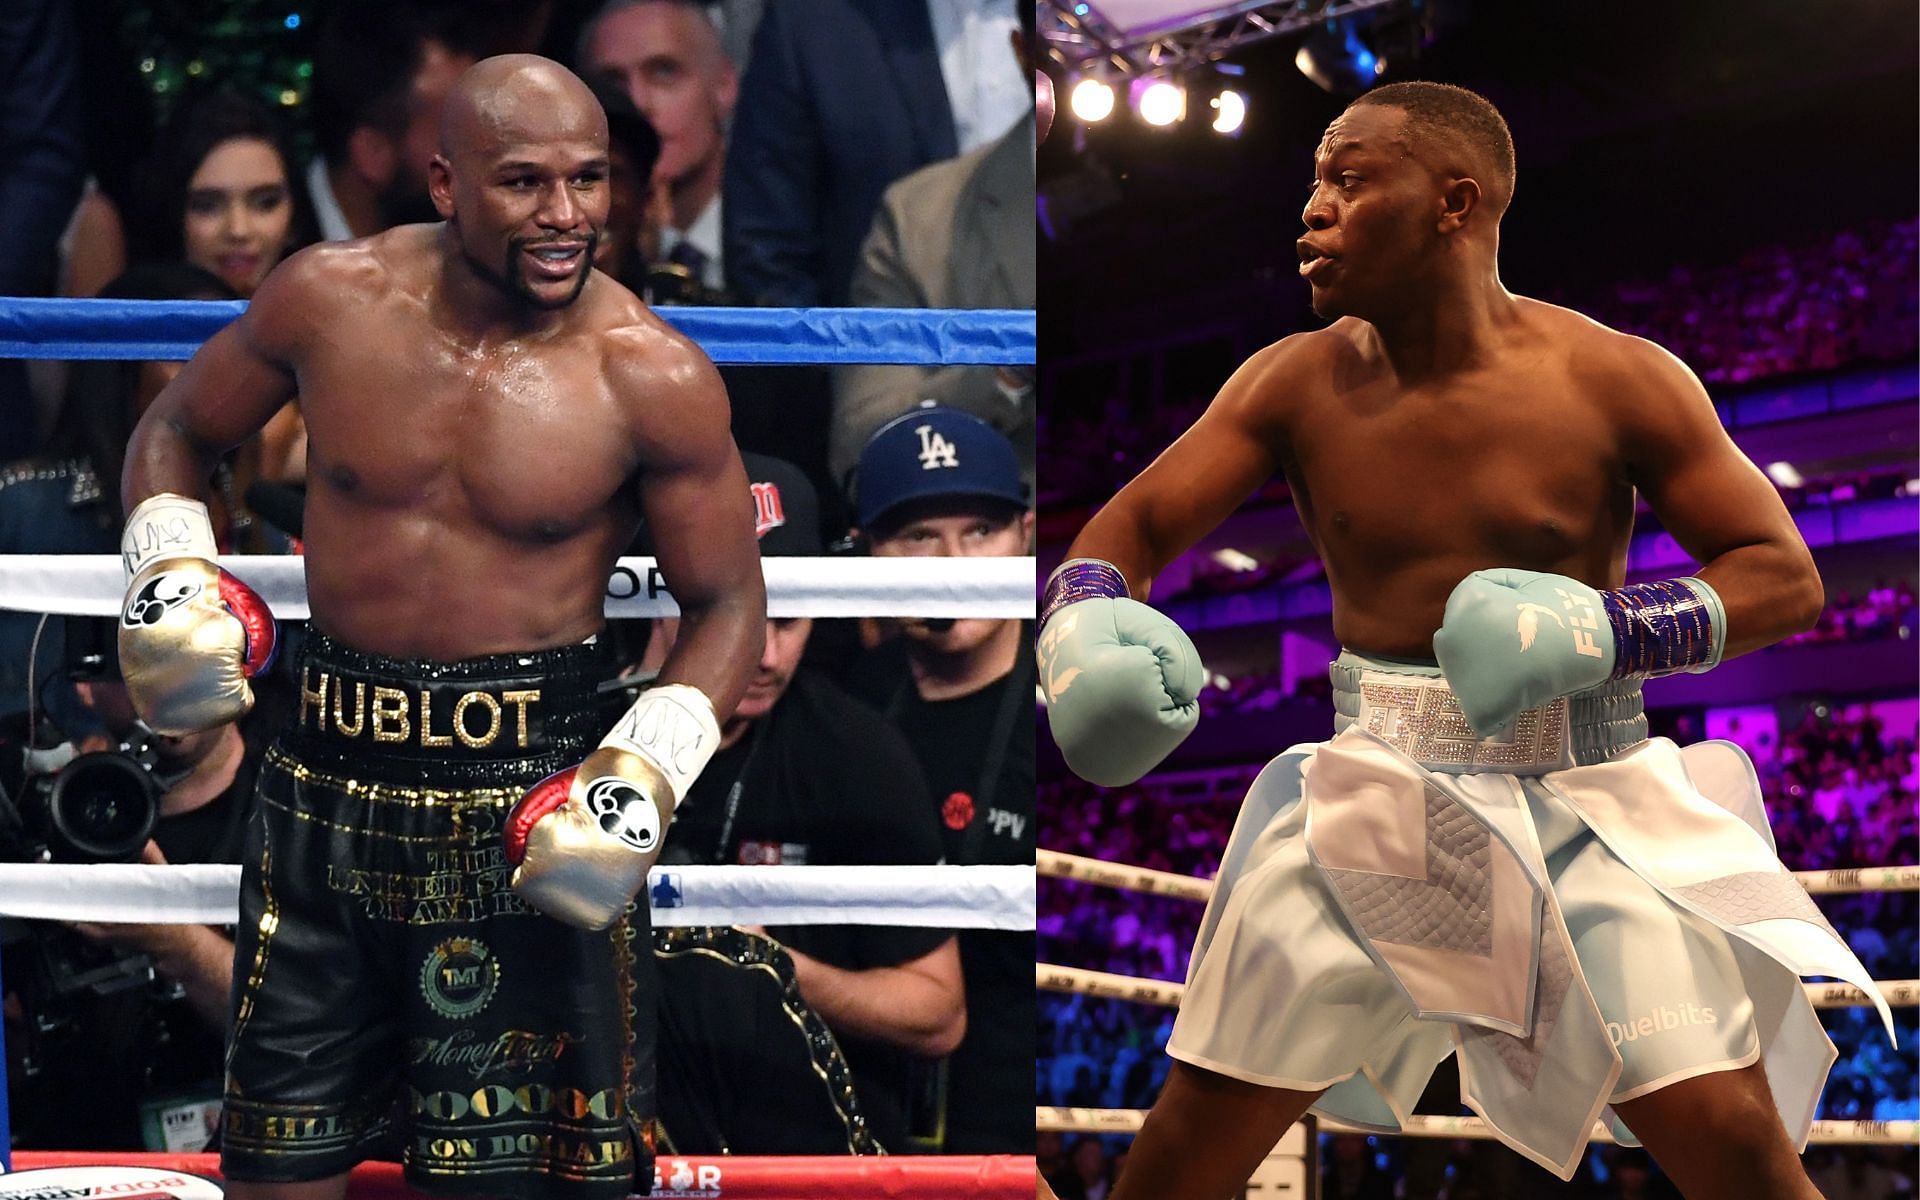 Floyd Mayweather (left) and Deji (right). [Images courtesy: both images from Getty Images]